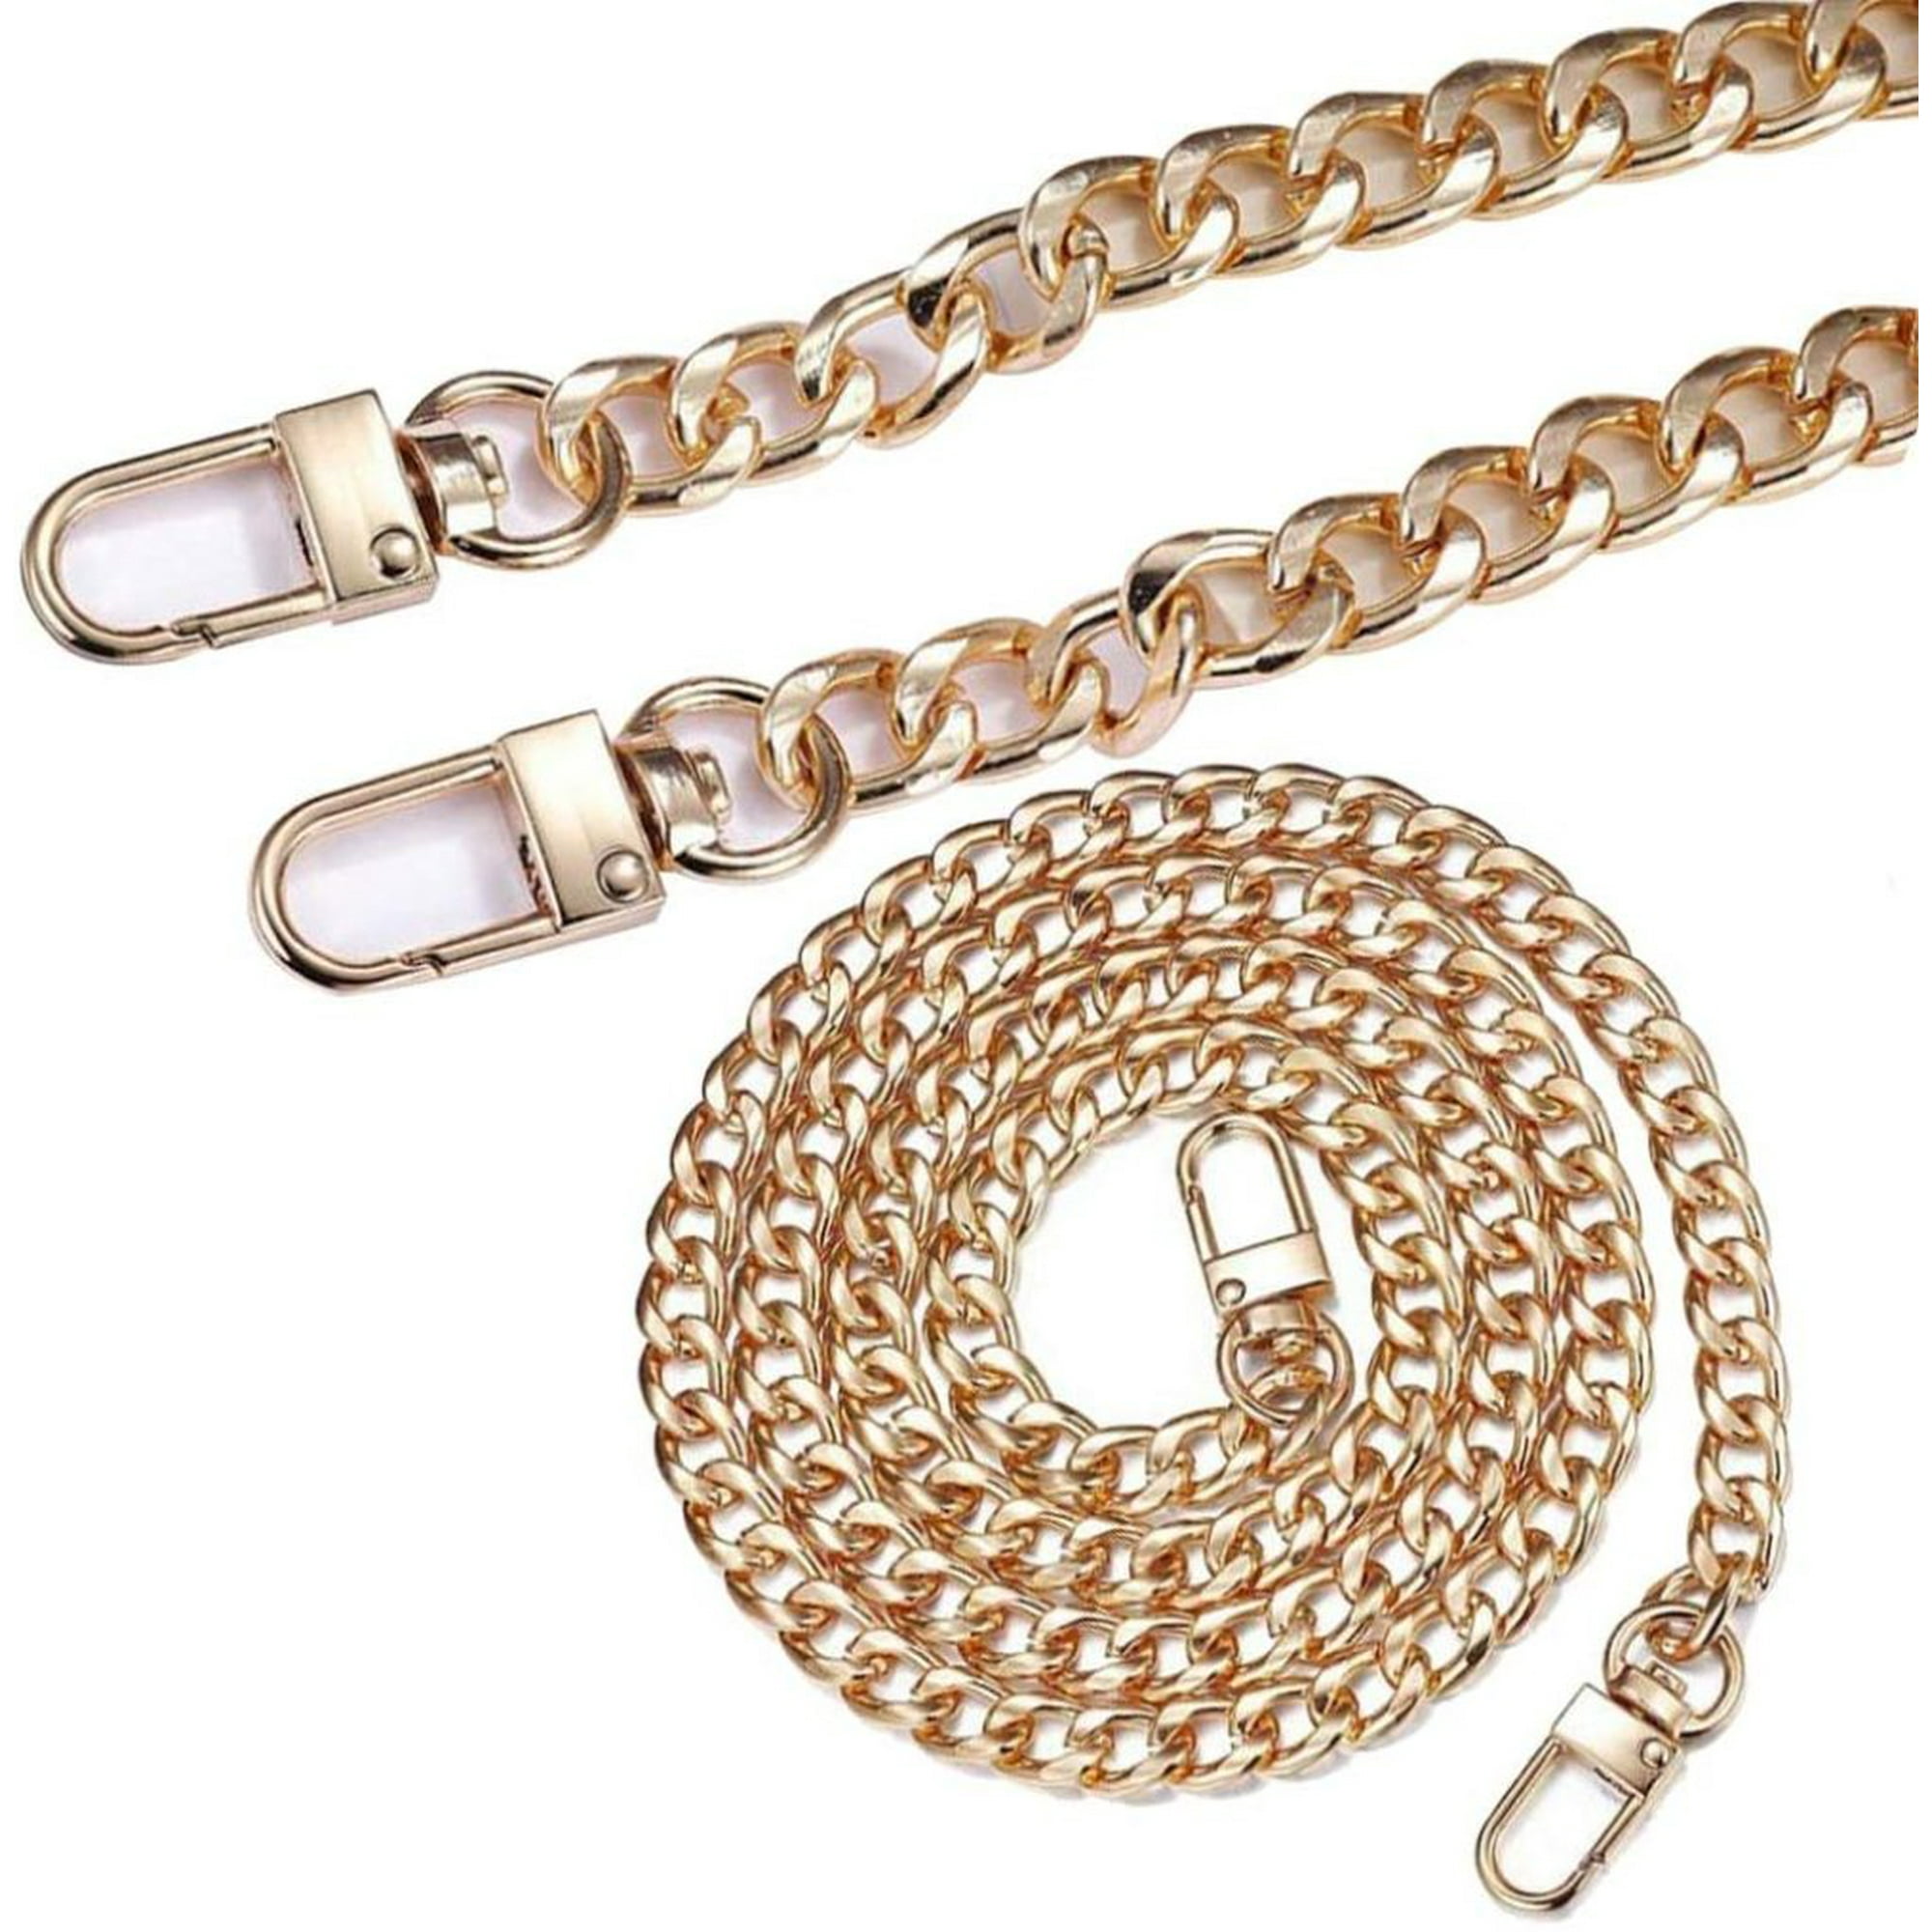 2 PK 47 DIY Flat Chain Strap with Metal Lobster Clasp Purse Chain Strap  Interchangeable Bag Chains Replacement Handbag Chains Accessories for DIY  Shoulder Cross Body Sling (Gold) 